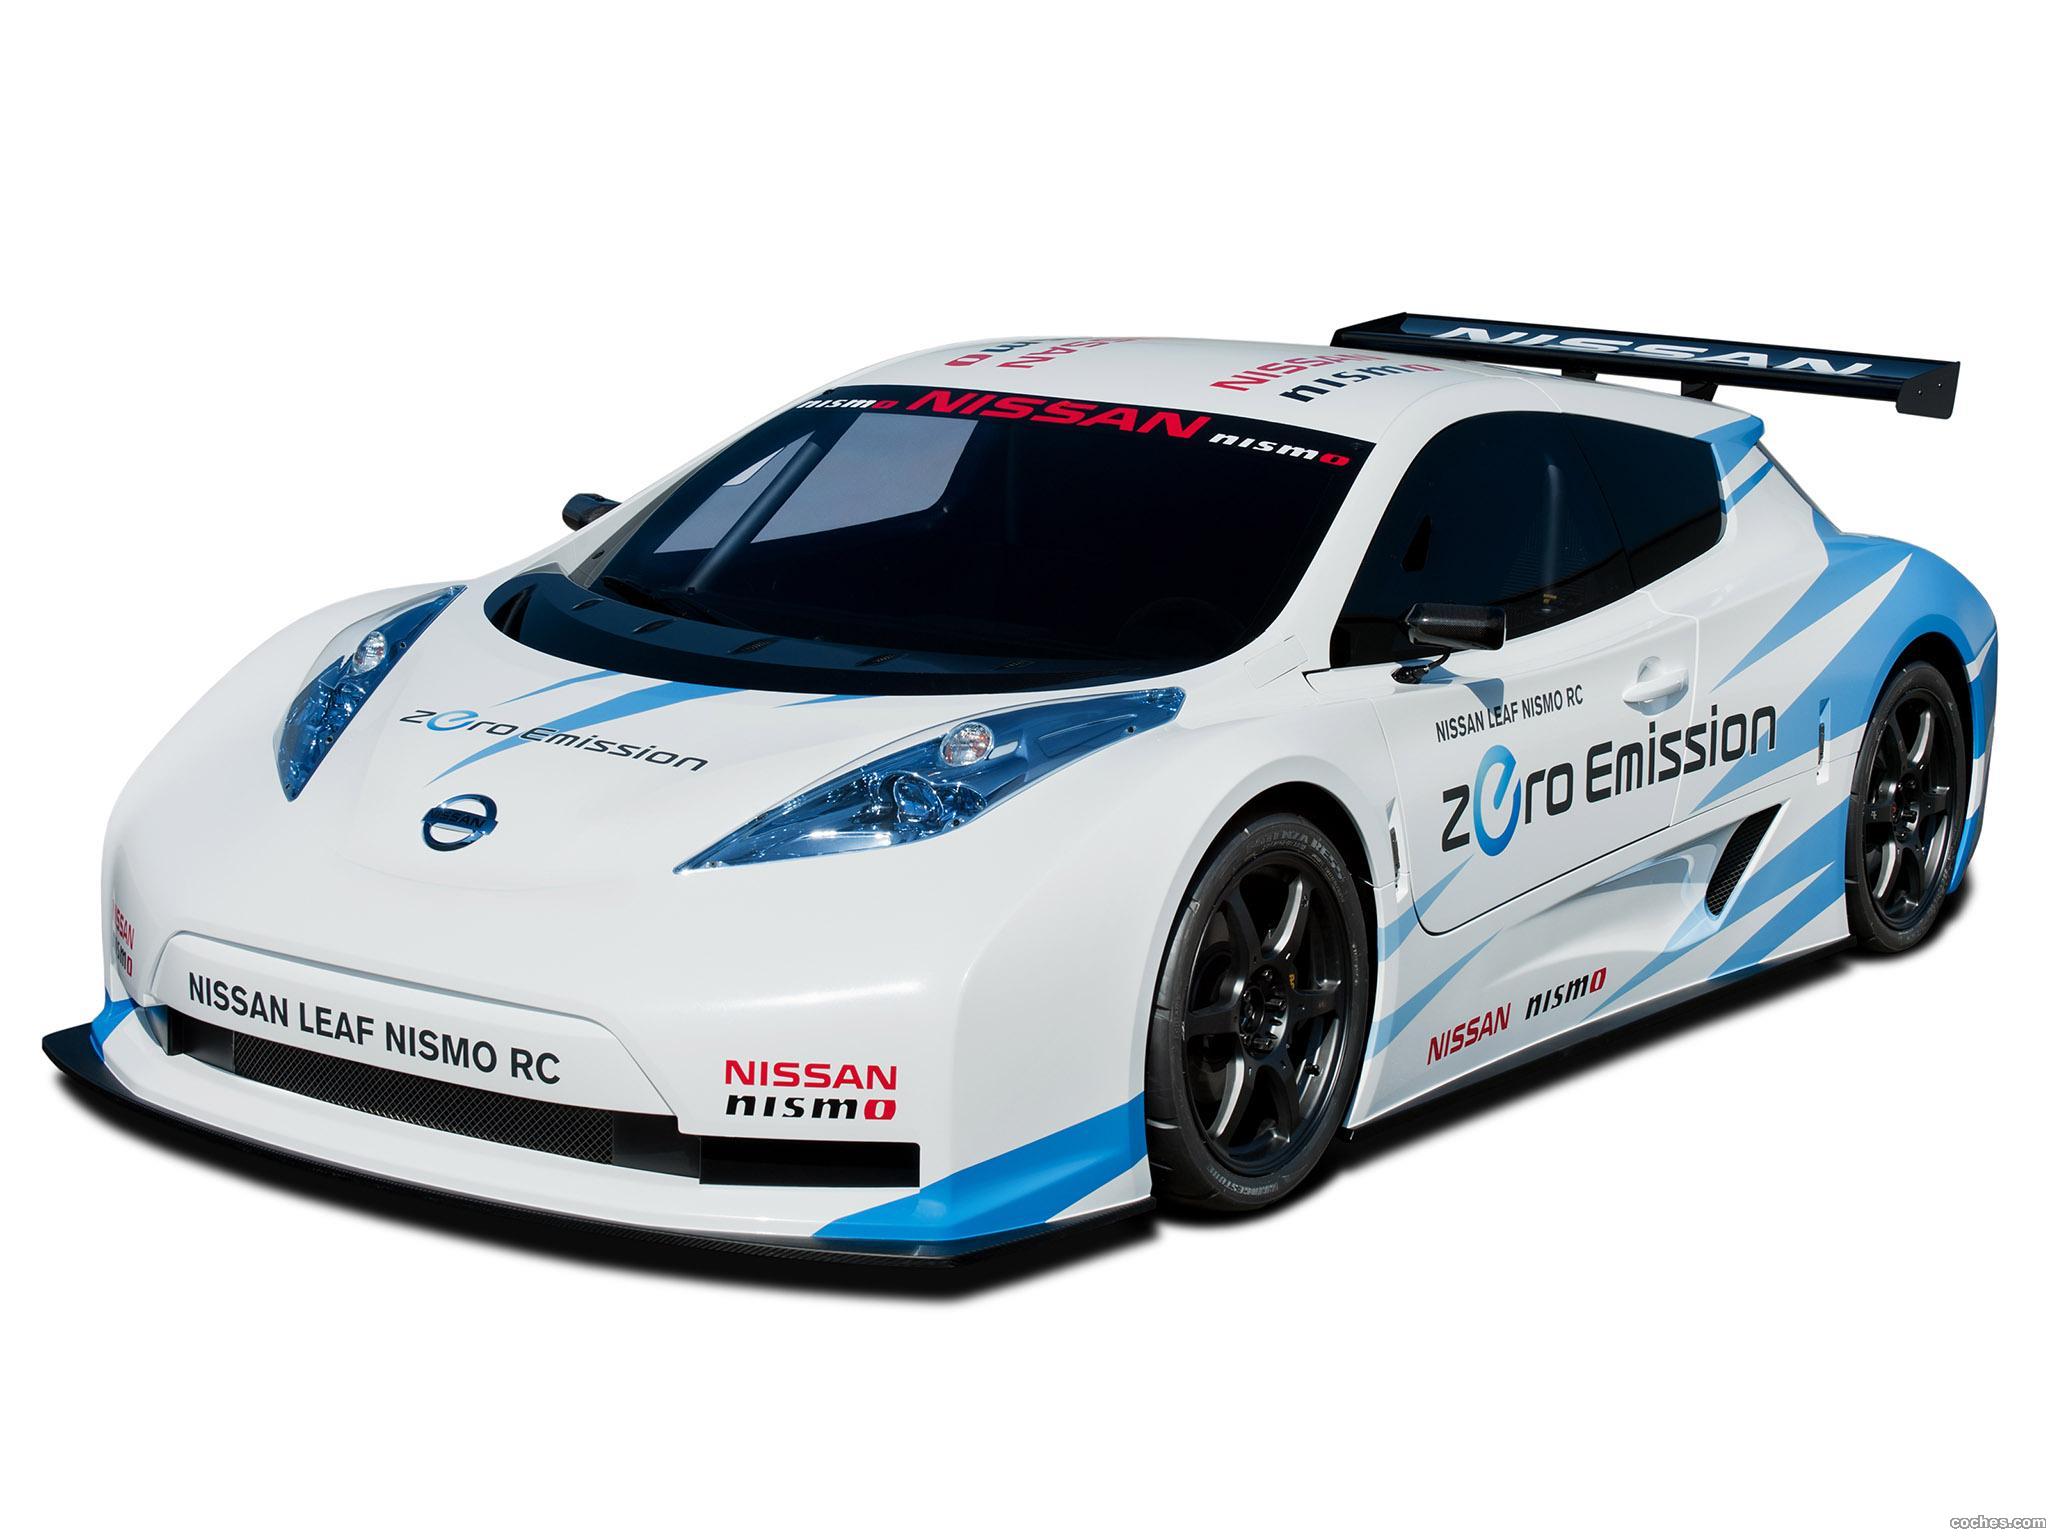 nismo_nissan-leaf-rc-racing-competition-2011_r1